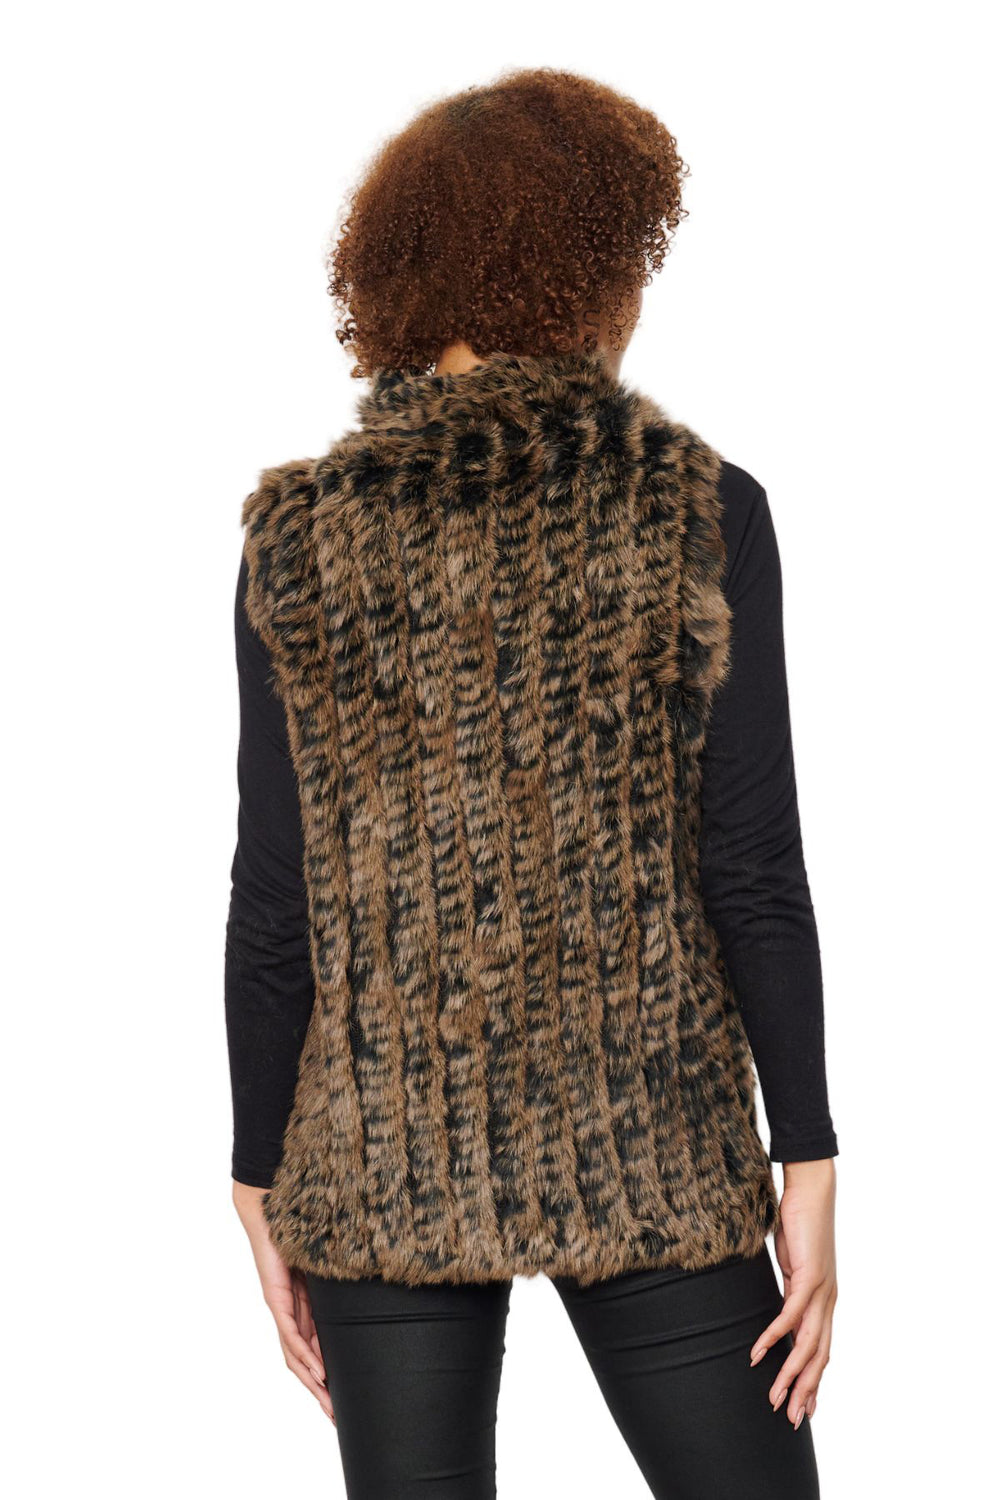 Absolute luxury the Jessica Vest by designer Caju is a bold and beautiful piece.